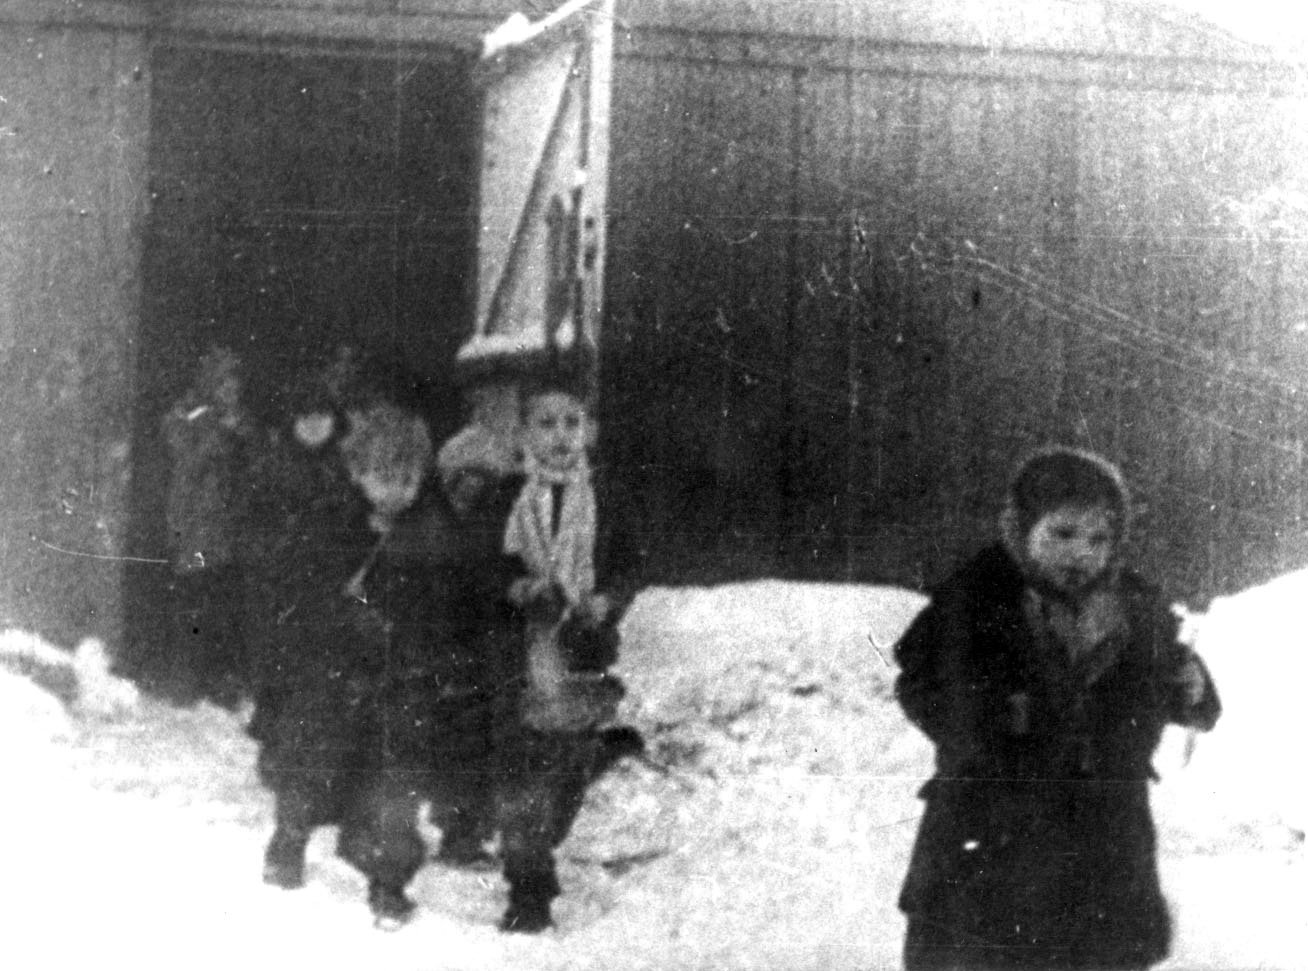 Children are seen after the liberation of the Nazi death camp Auschwitz-Birkenau in 1945 in Oswiecim, Poland. Historians estimate the Nazis sent at least 1.3 million people to Auschwitz between 1940-45, and it is believed that some 1.1 million of those perished there. Auschwitz was liberated by the Russian Army Jan. 27, 1945.